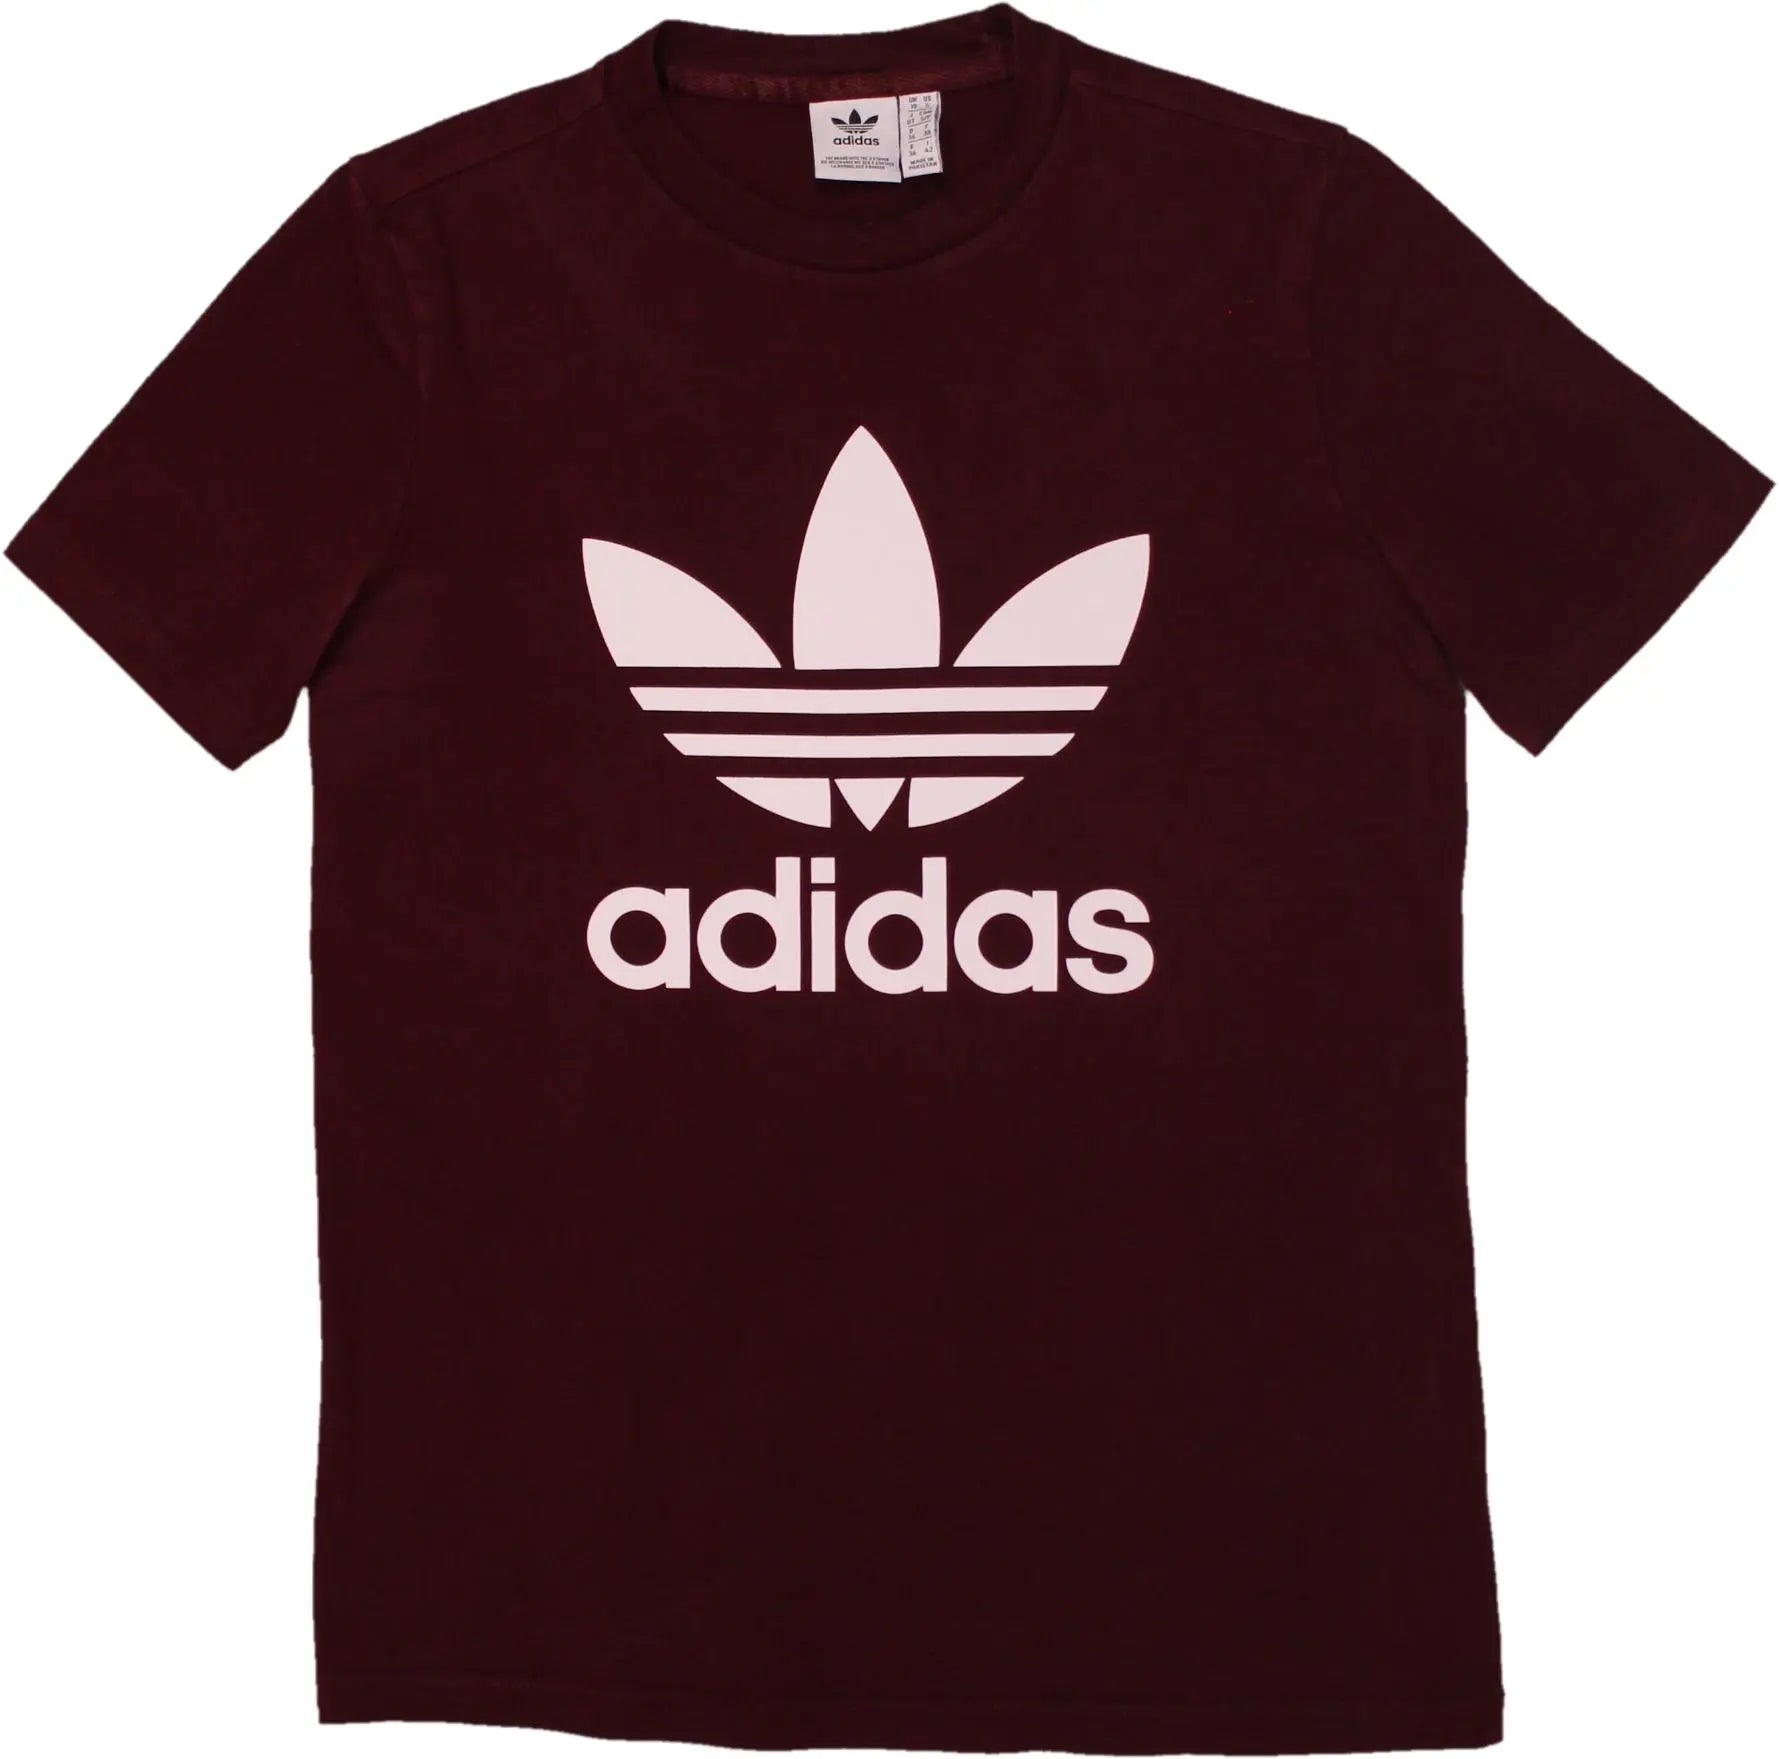 Adidas - Adidas T-Shirt- ThriftTale.com - Vintage and second handclothing